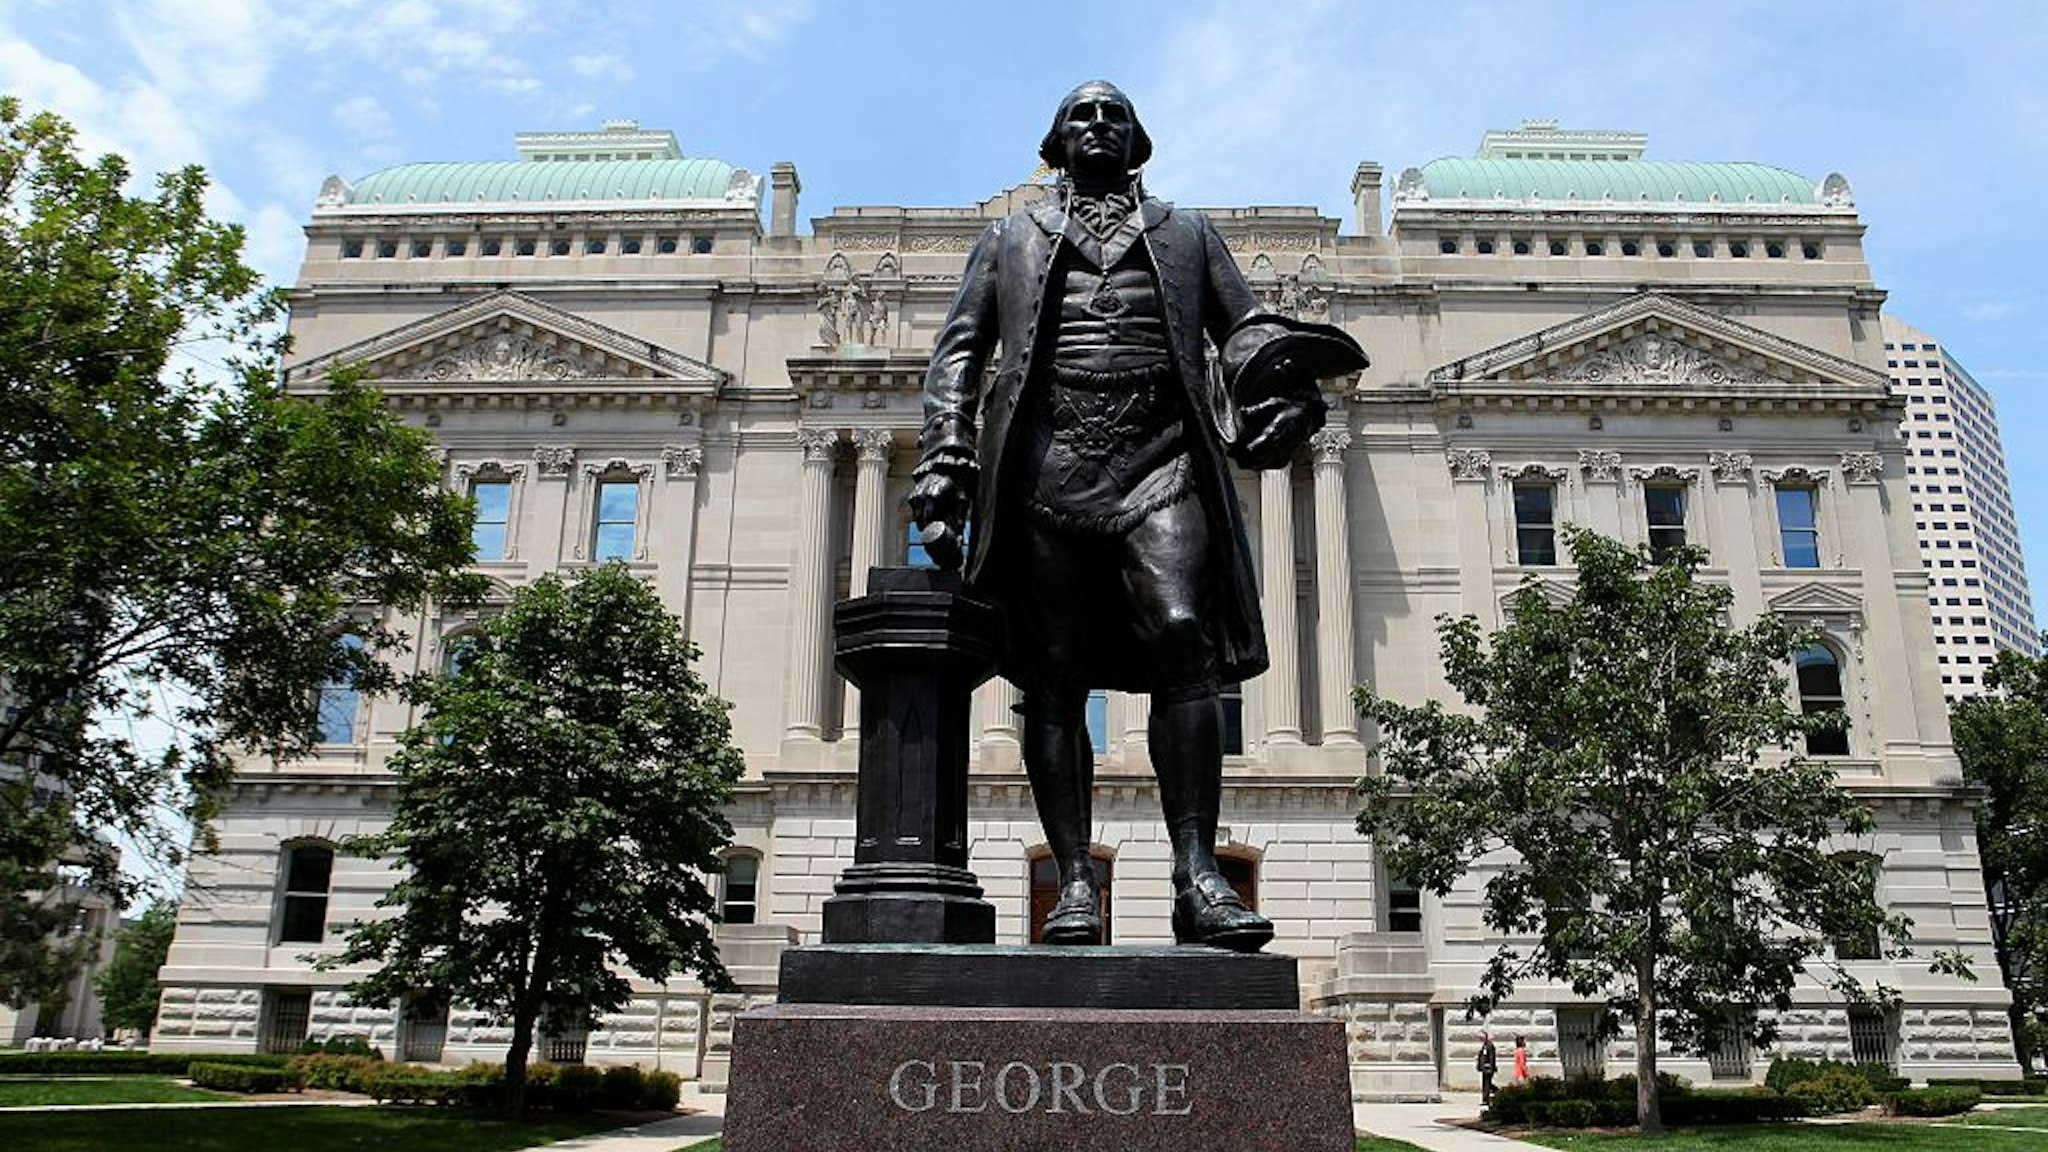 INDIANAPOLIS - JULY 16: George Washington statue stands outside the Indiana State Capitol Building on July 16, 2015 in Indianapolis, Indiana.